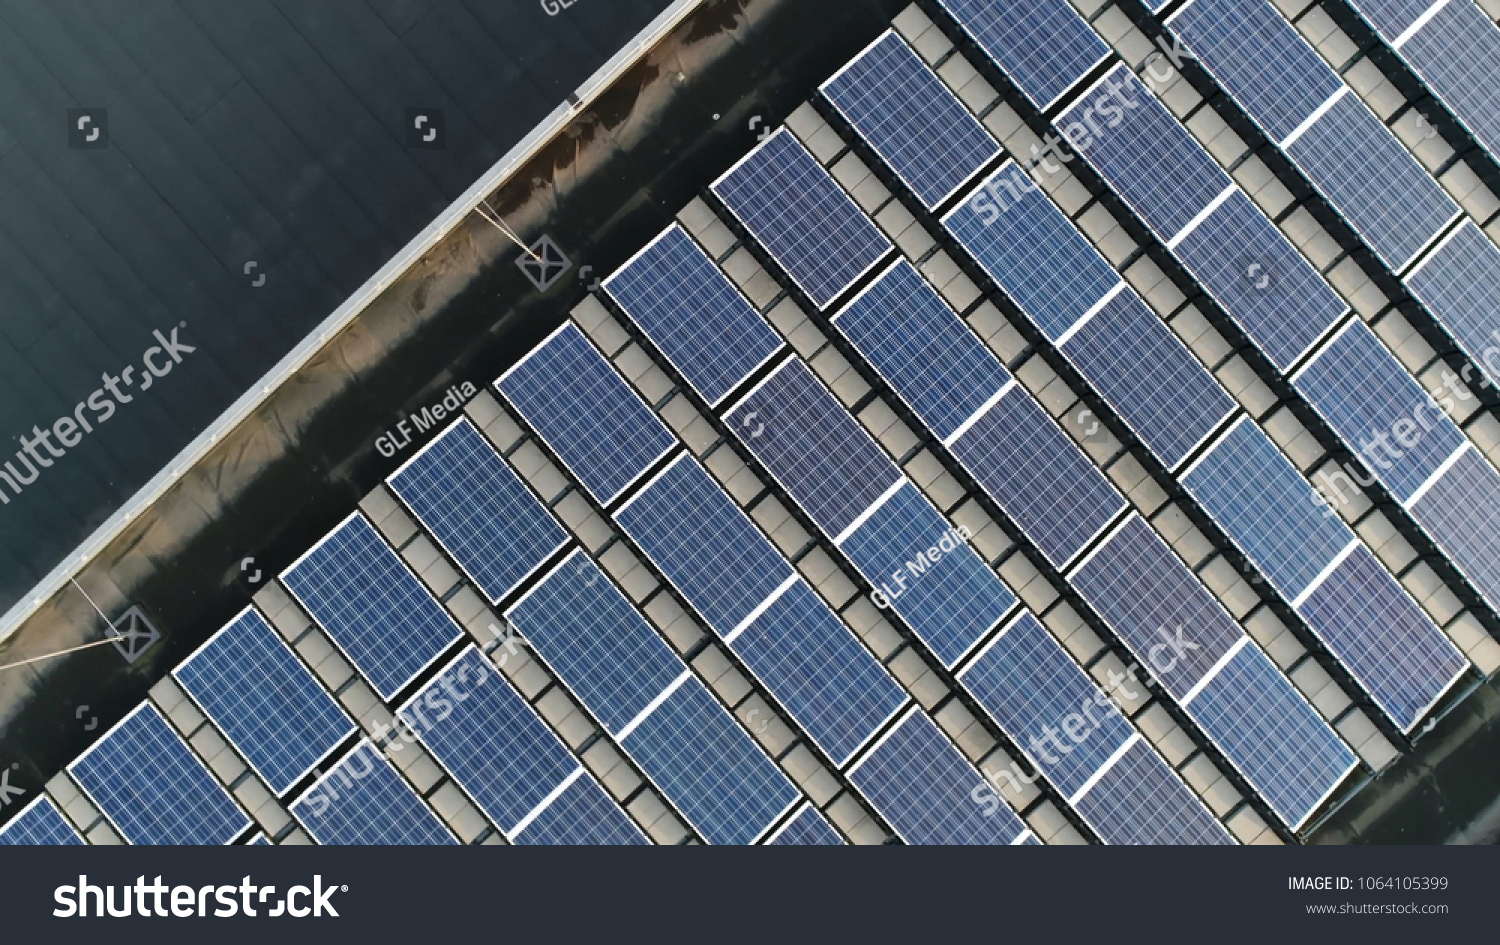 Aerial top down photo of solar panels PV modules mounted on flat roof photovoltaic solar panels absorb sunlight as a source of energy to generate electricity creating sustainable energy #1064105399